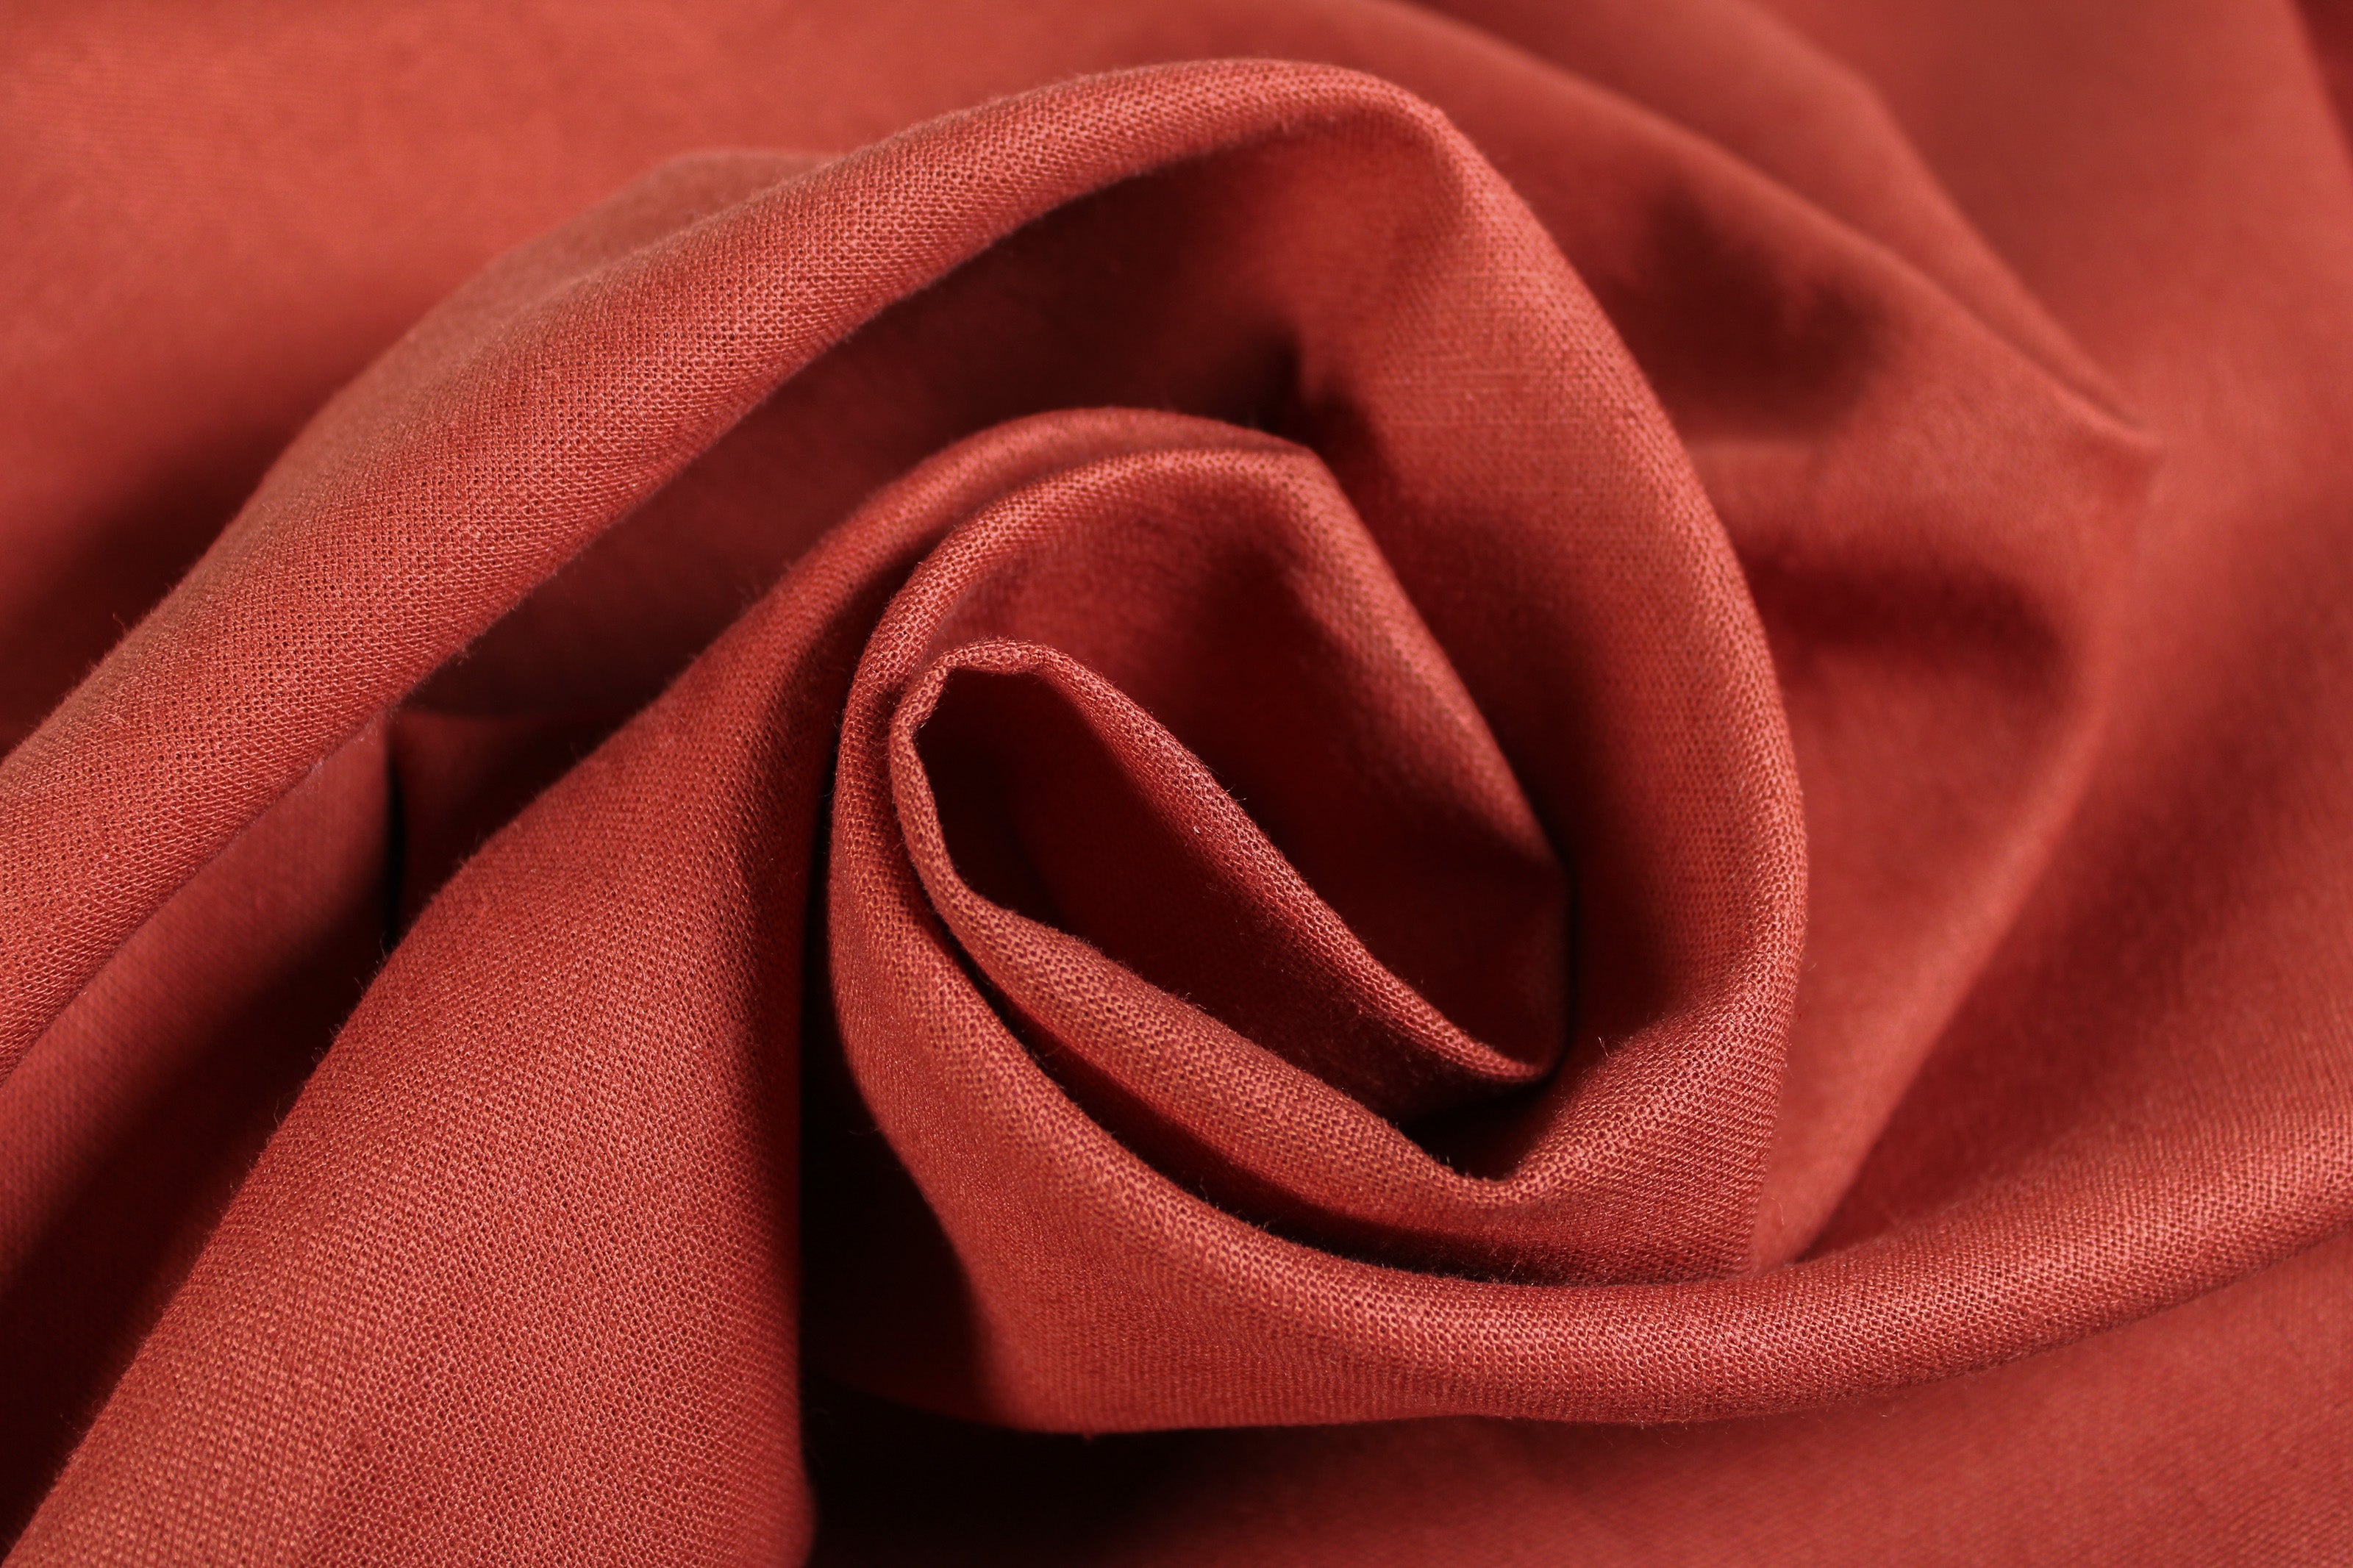 NEW LINEN FABRIC COLLECTION!!! / 100% Linen Fabric by the Yard / Marsala Linen Fabric / Buy Linen Online